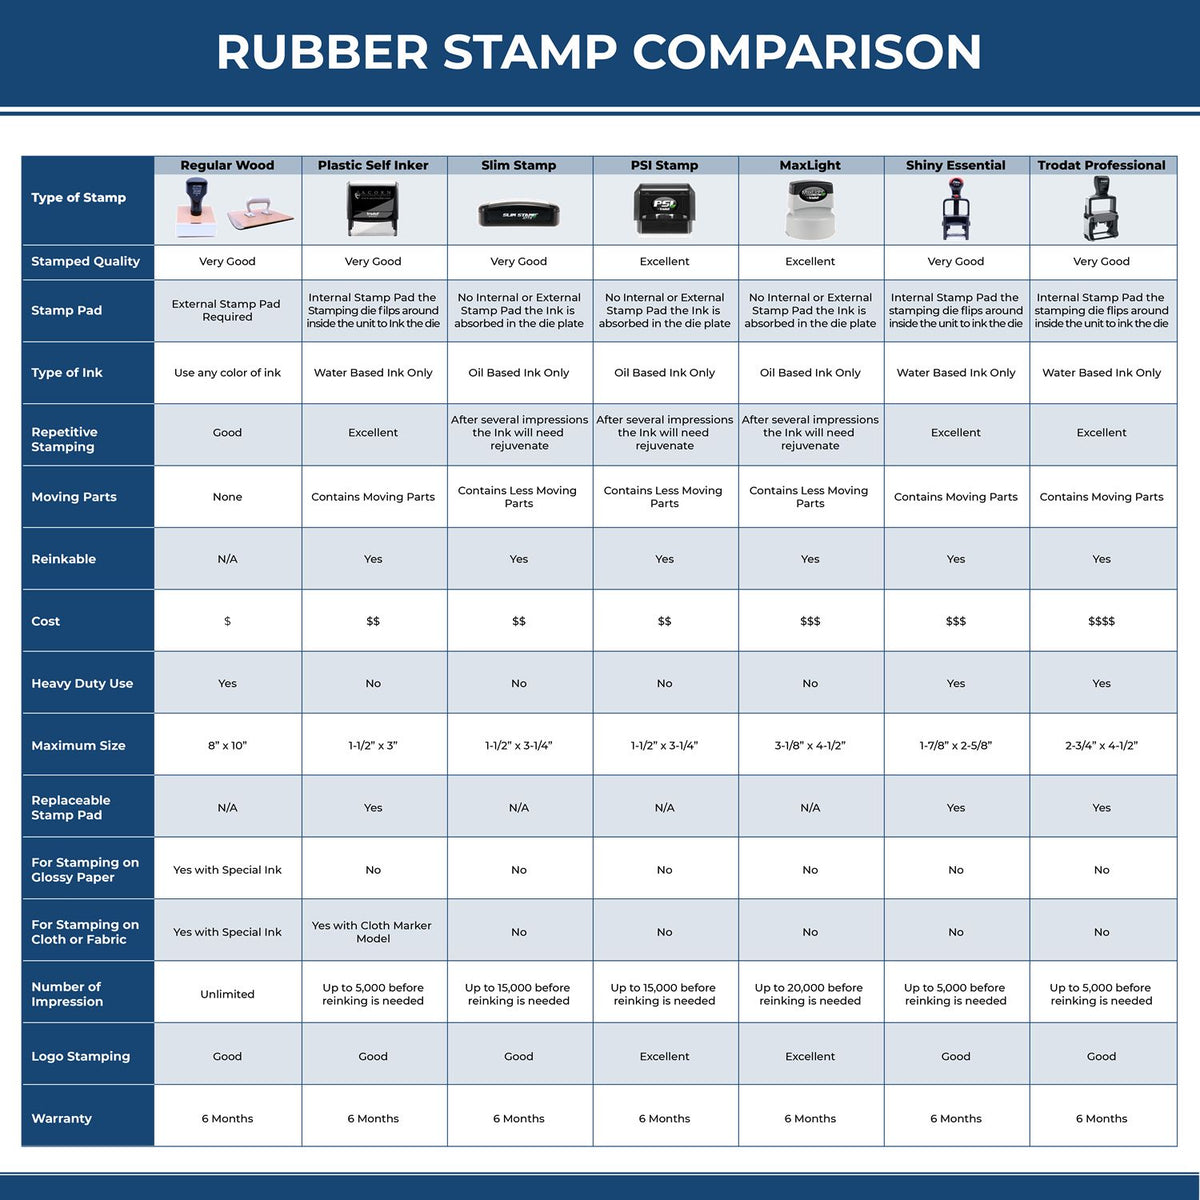 A comparison chart for the different types of mount models available for the Premium MaxLight Pre-Inked Missouri Engineering Stamp.